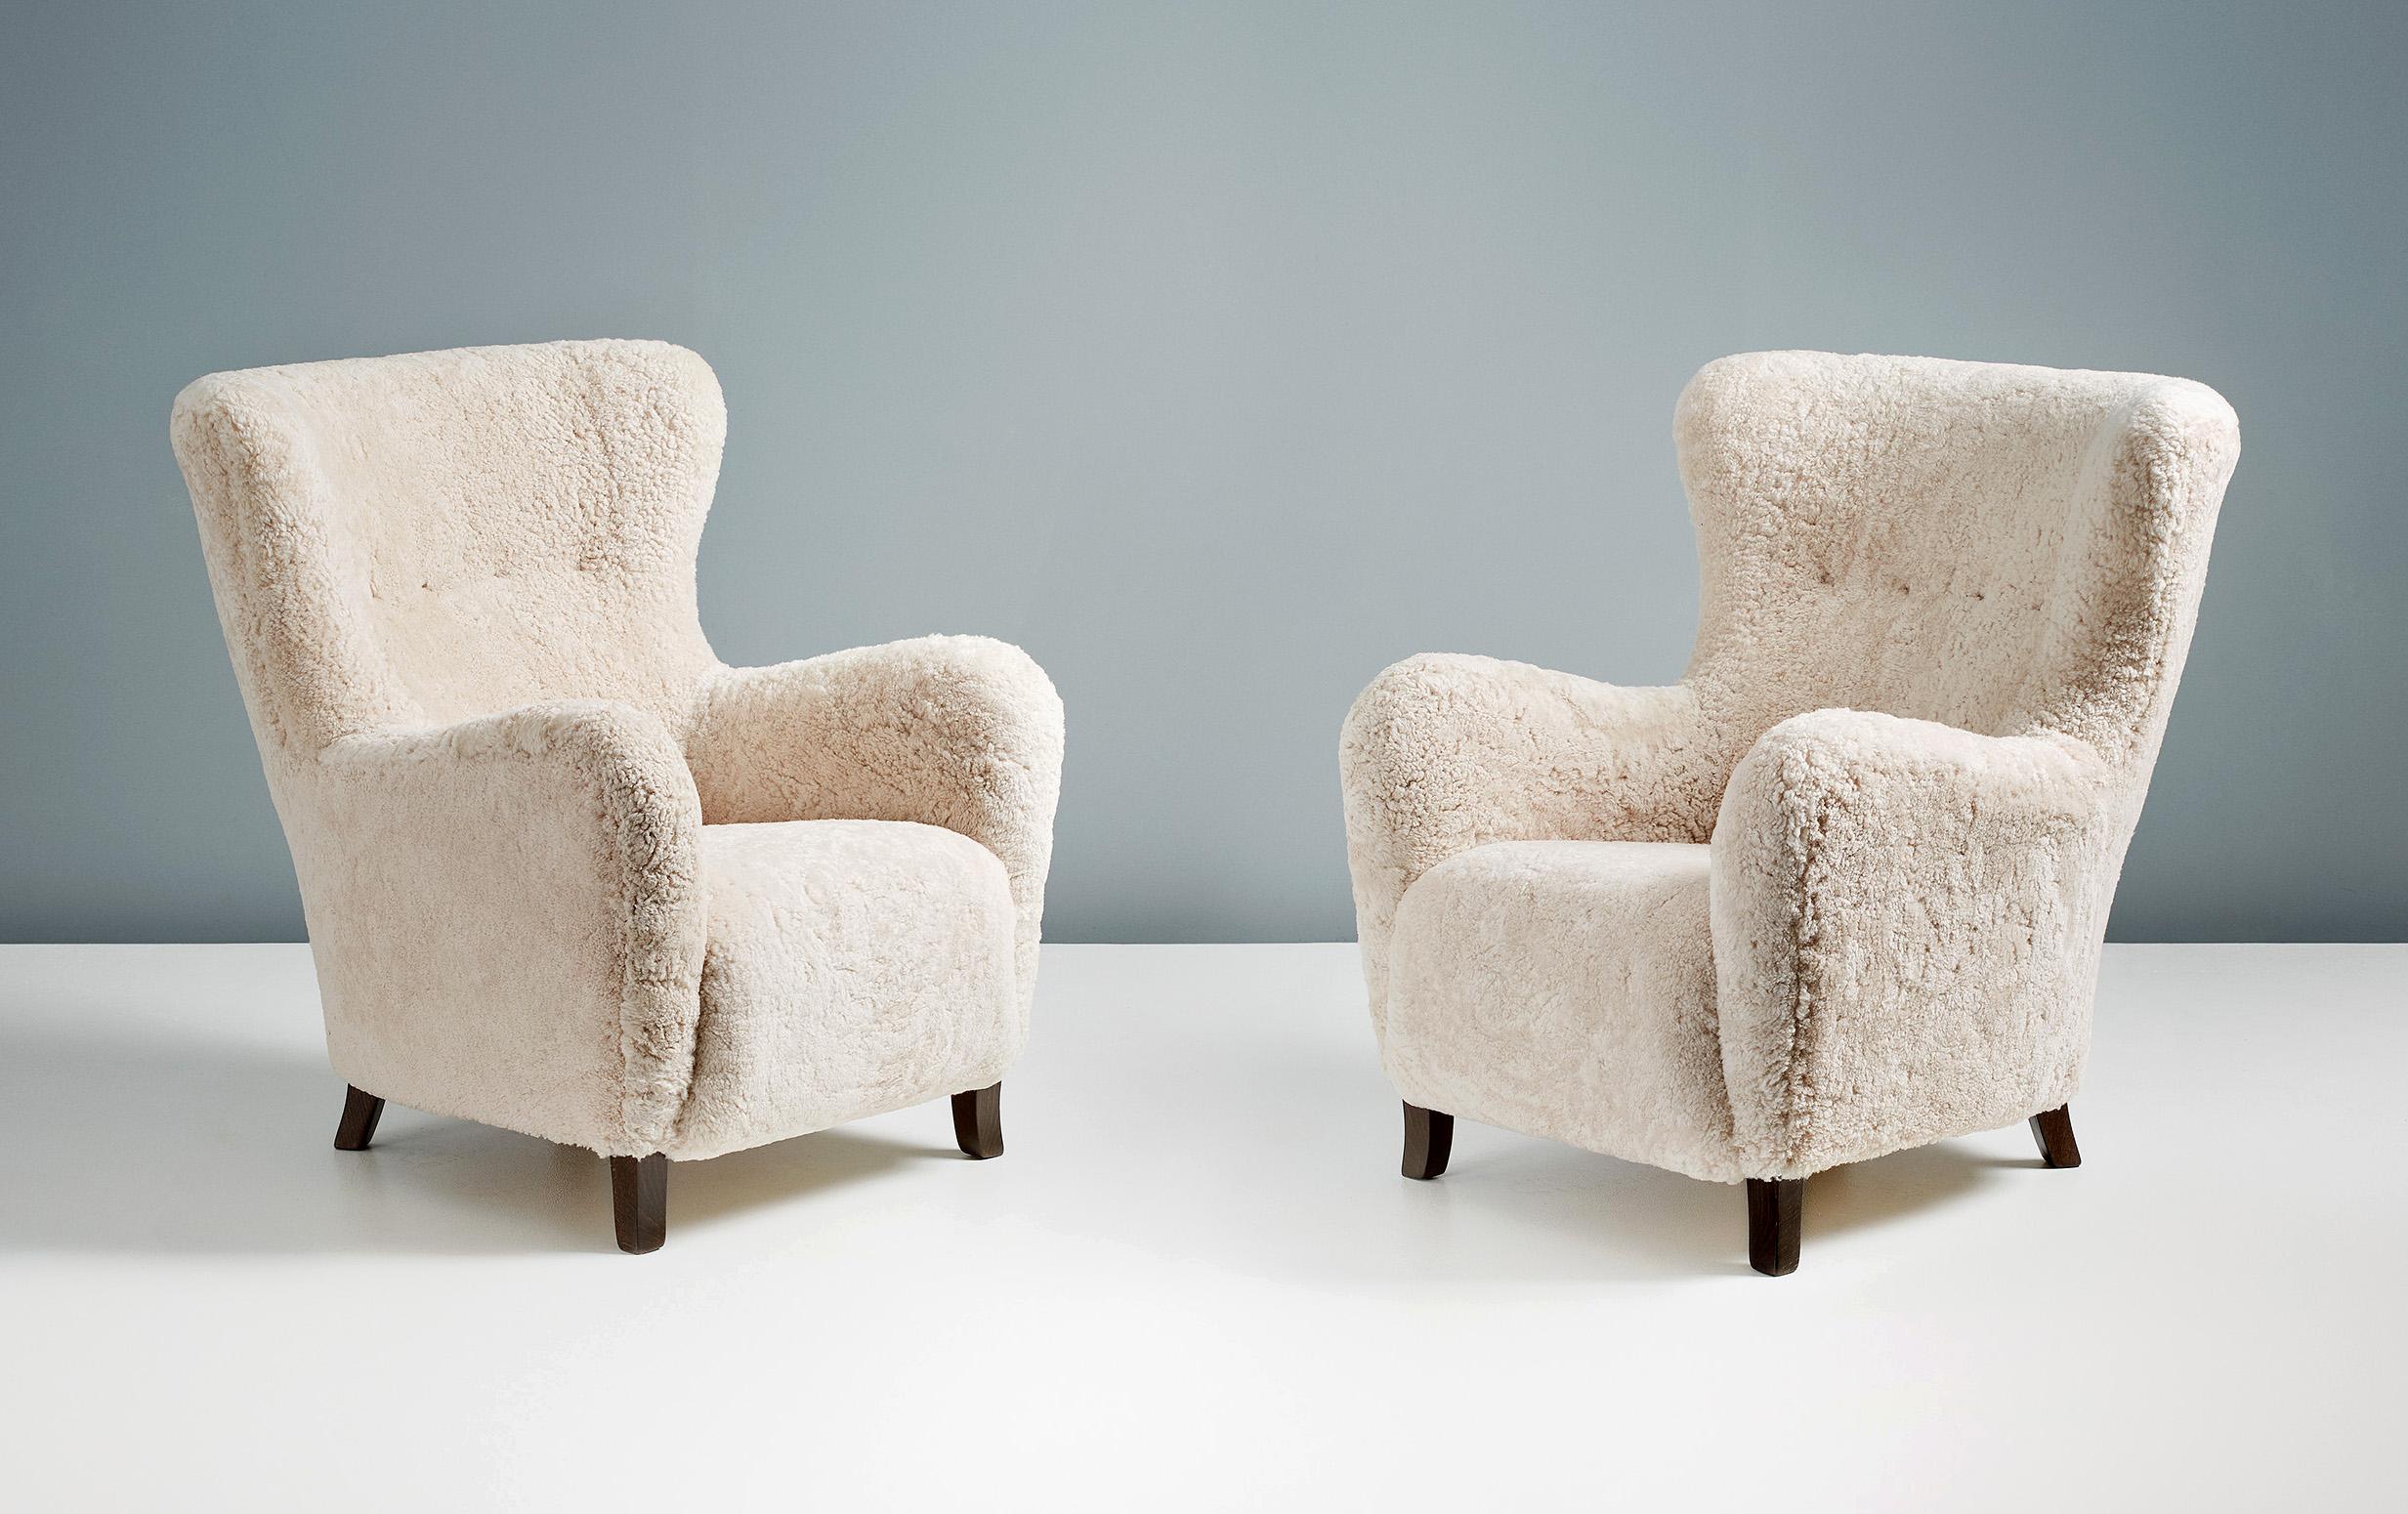 Dagmar Design

Sampo Wing Chairs

A pair of custom-made wing chairs developed & produced at our workshops in London using the highest quality materials. The frame is built from solid tulipwood with a fully sprung seat. These examples are upholstered